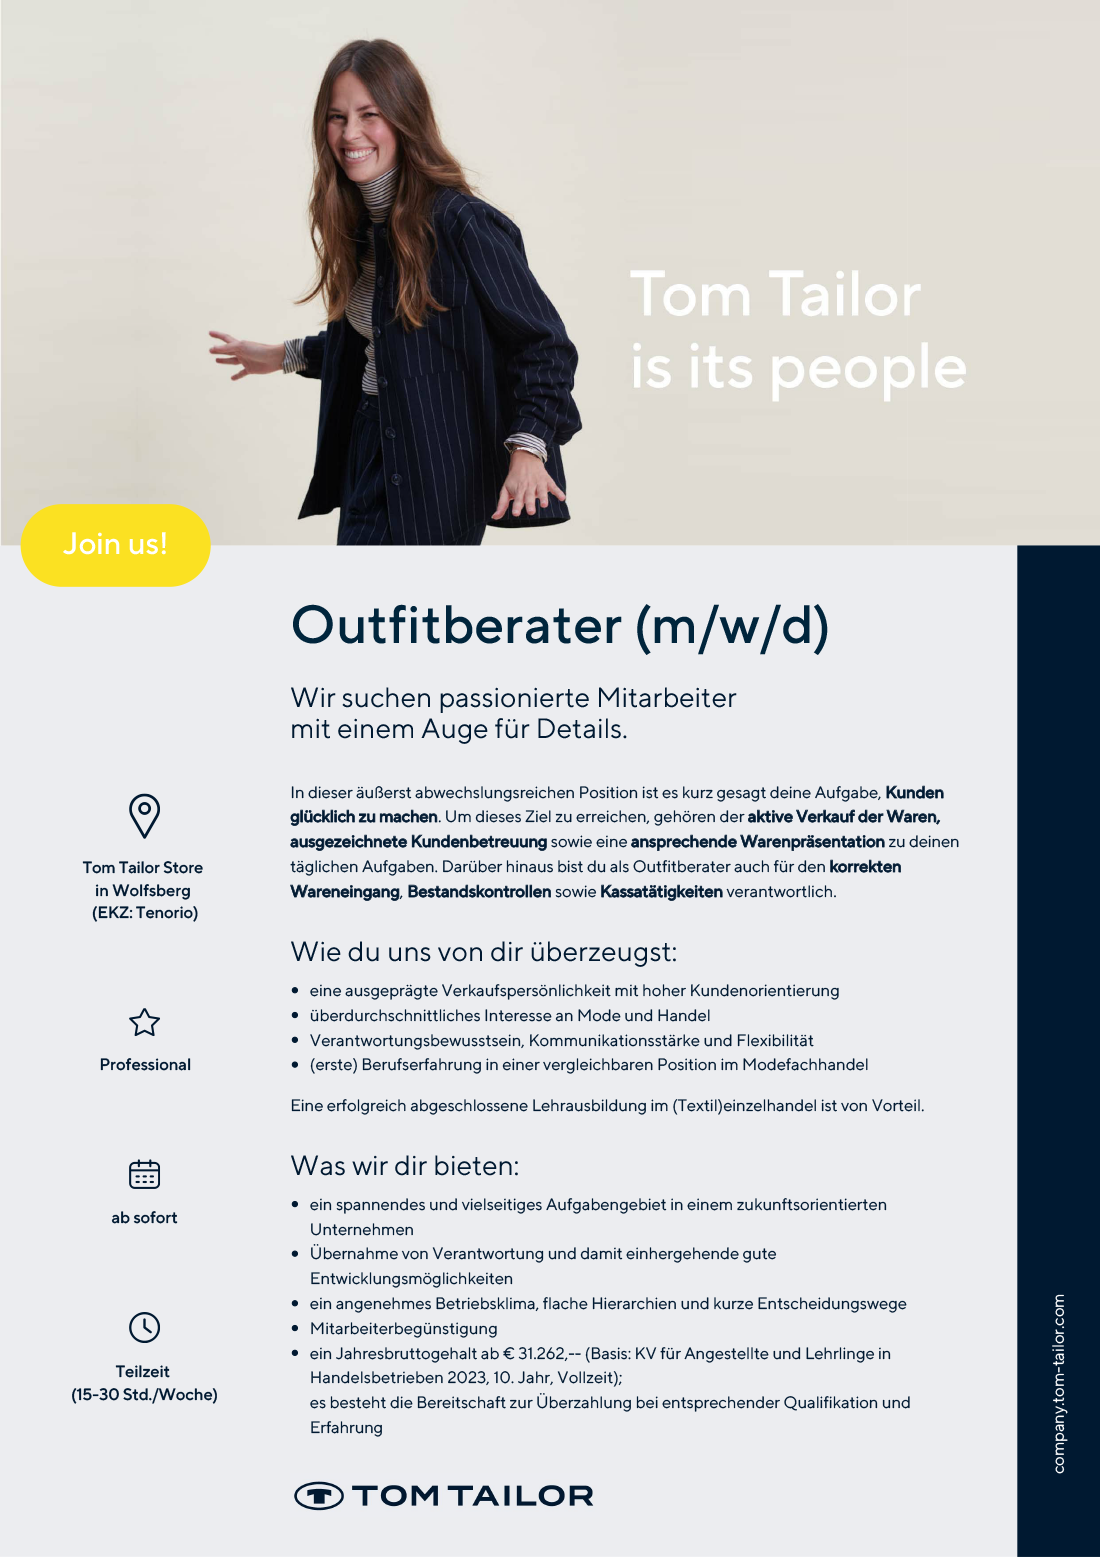 Outfitberater bei Tom Tailor